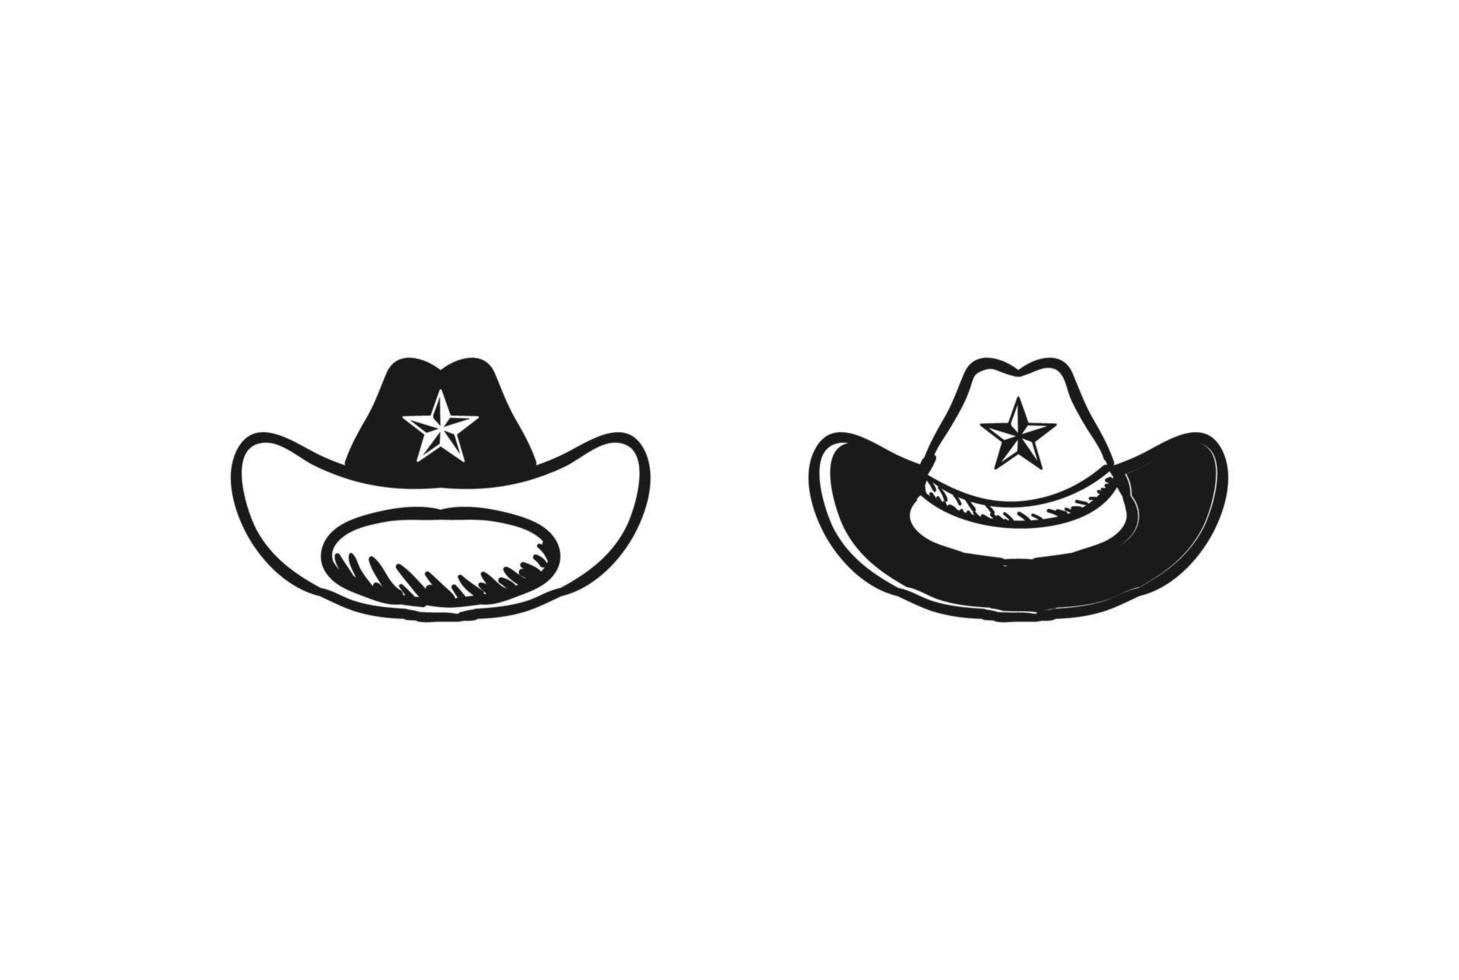 Texas Star Cowboy Sheriff Hat Western Country Silhouette Logo Design Vector